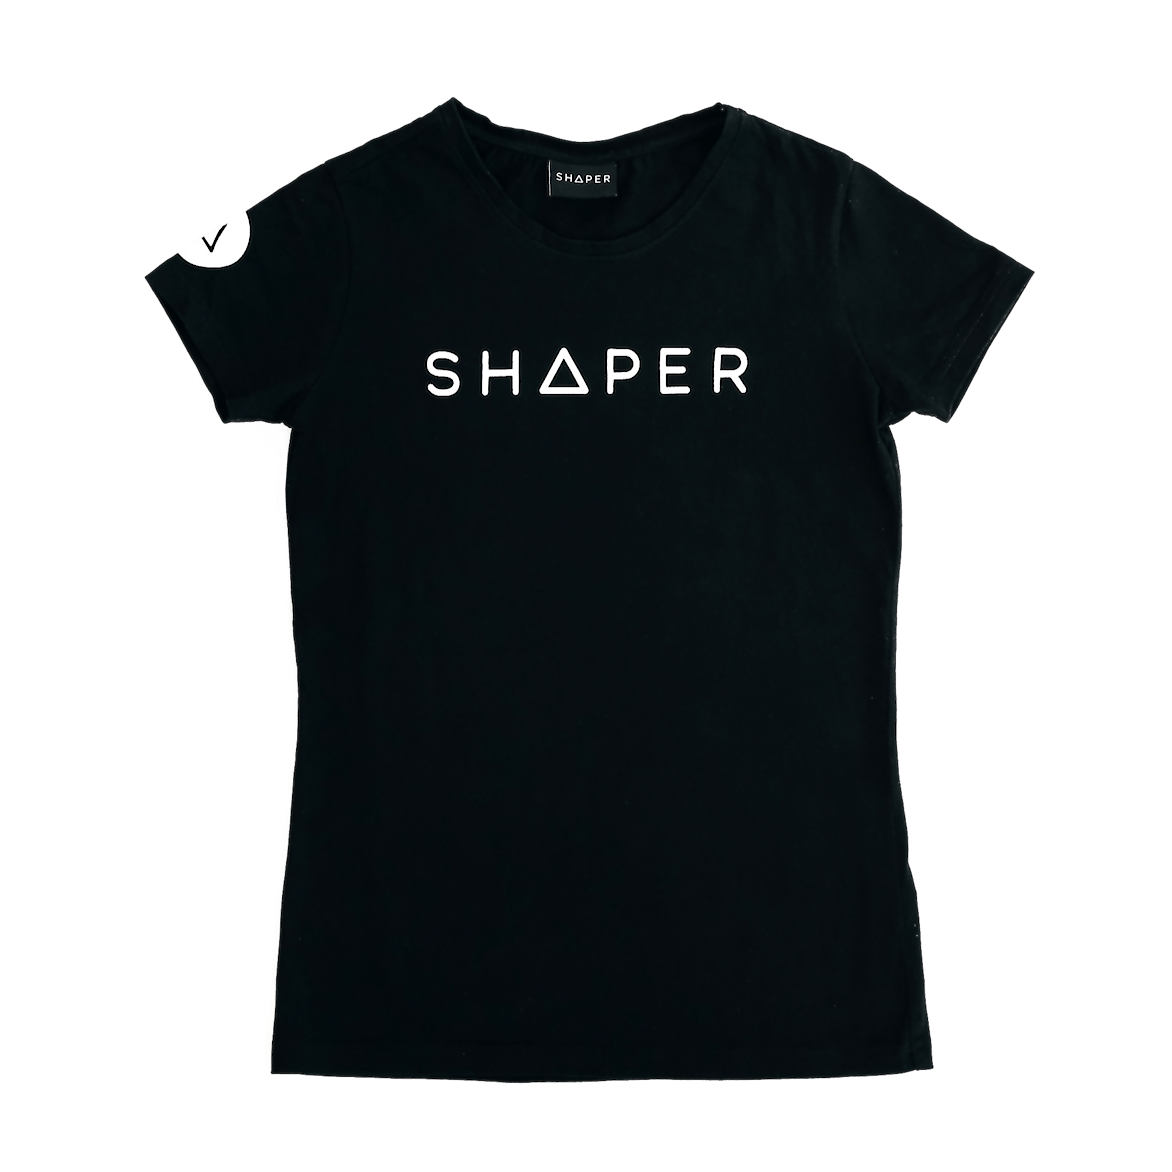 ShapEager Collections Faja Braless Waist Cincher T-Shirt Plus Lift Up The  Breast Body Shaper Shapewear 